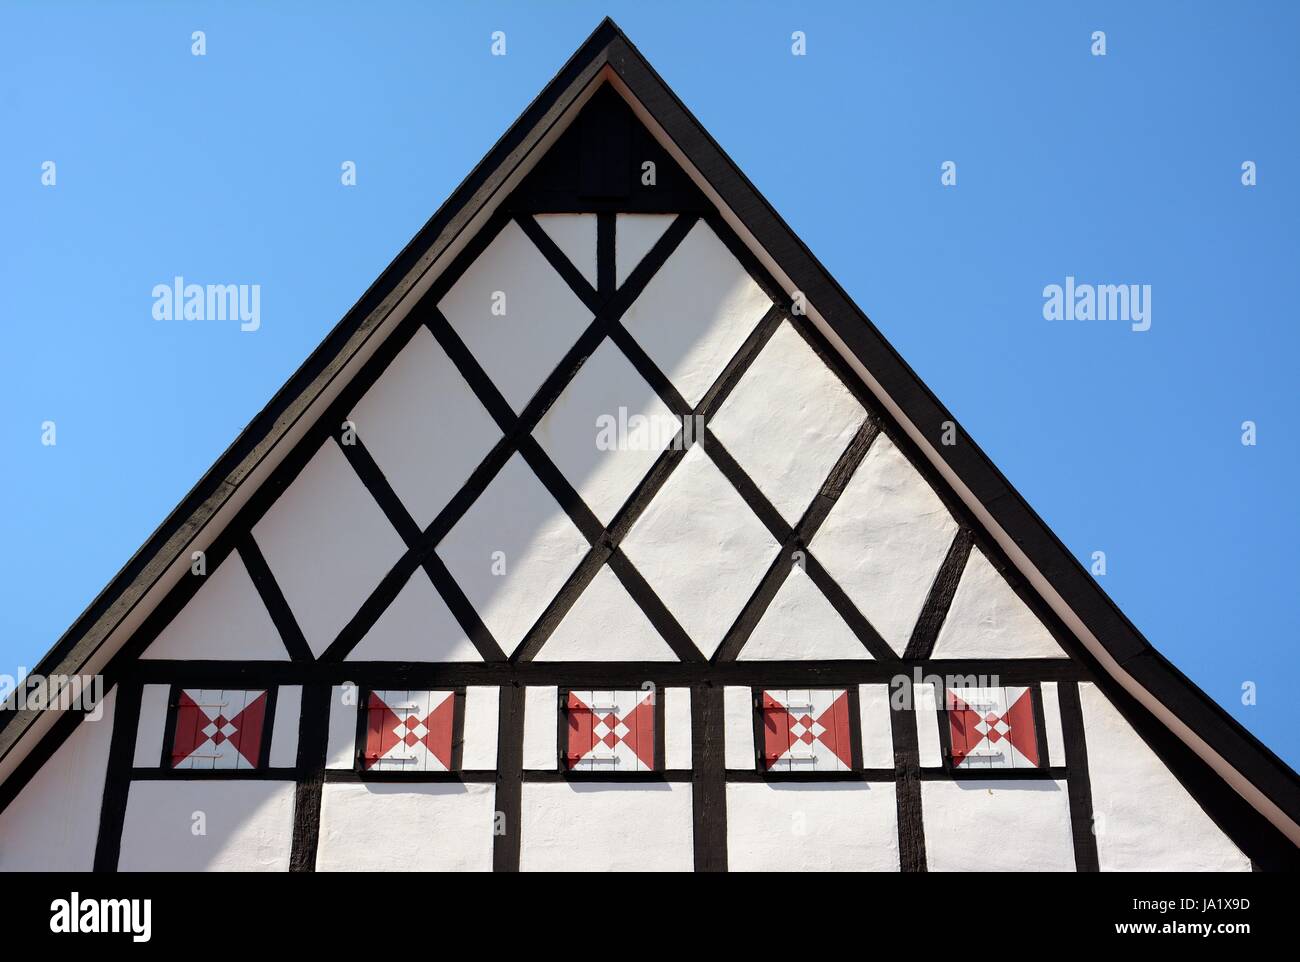 frame-work, facade, pointed roof, redecorates, restores, house, building, home, Stock Photo